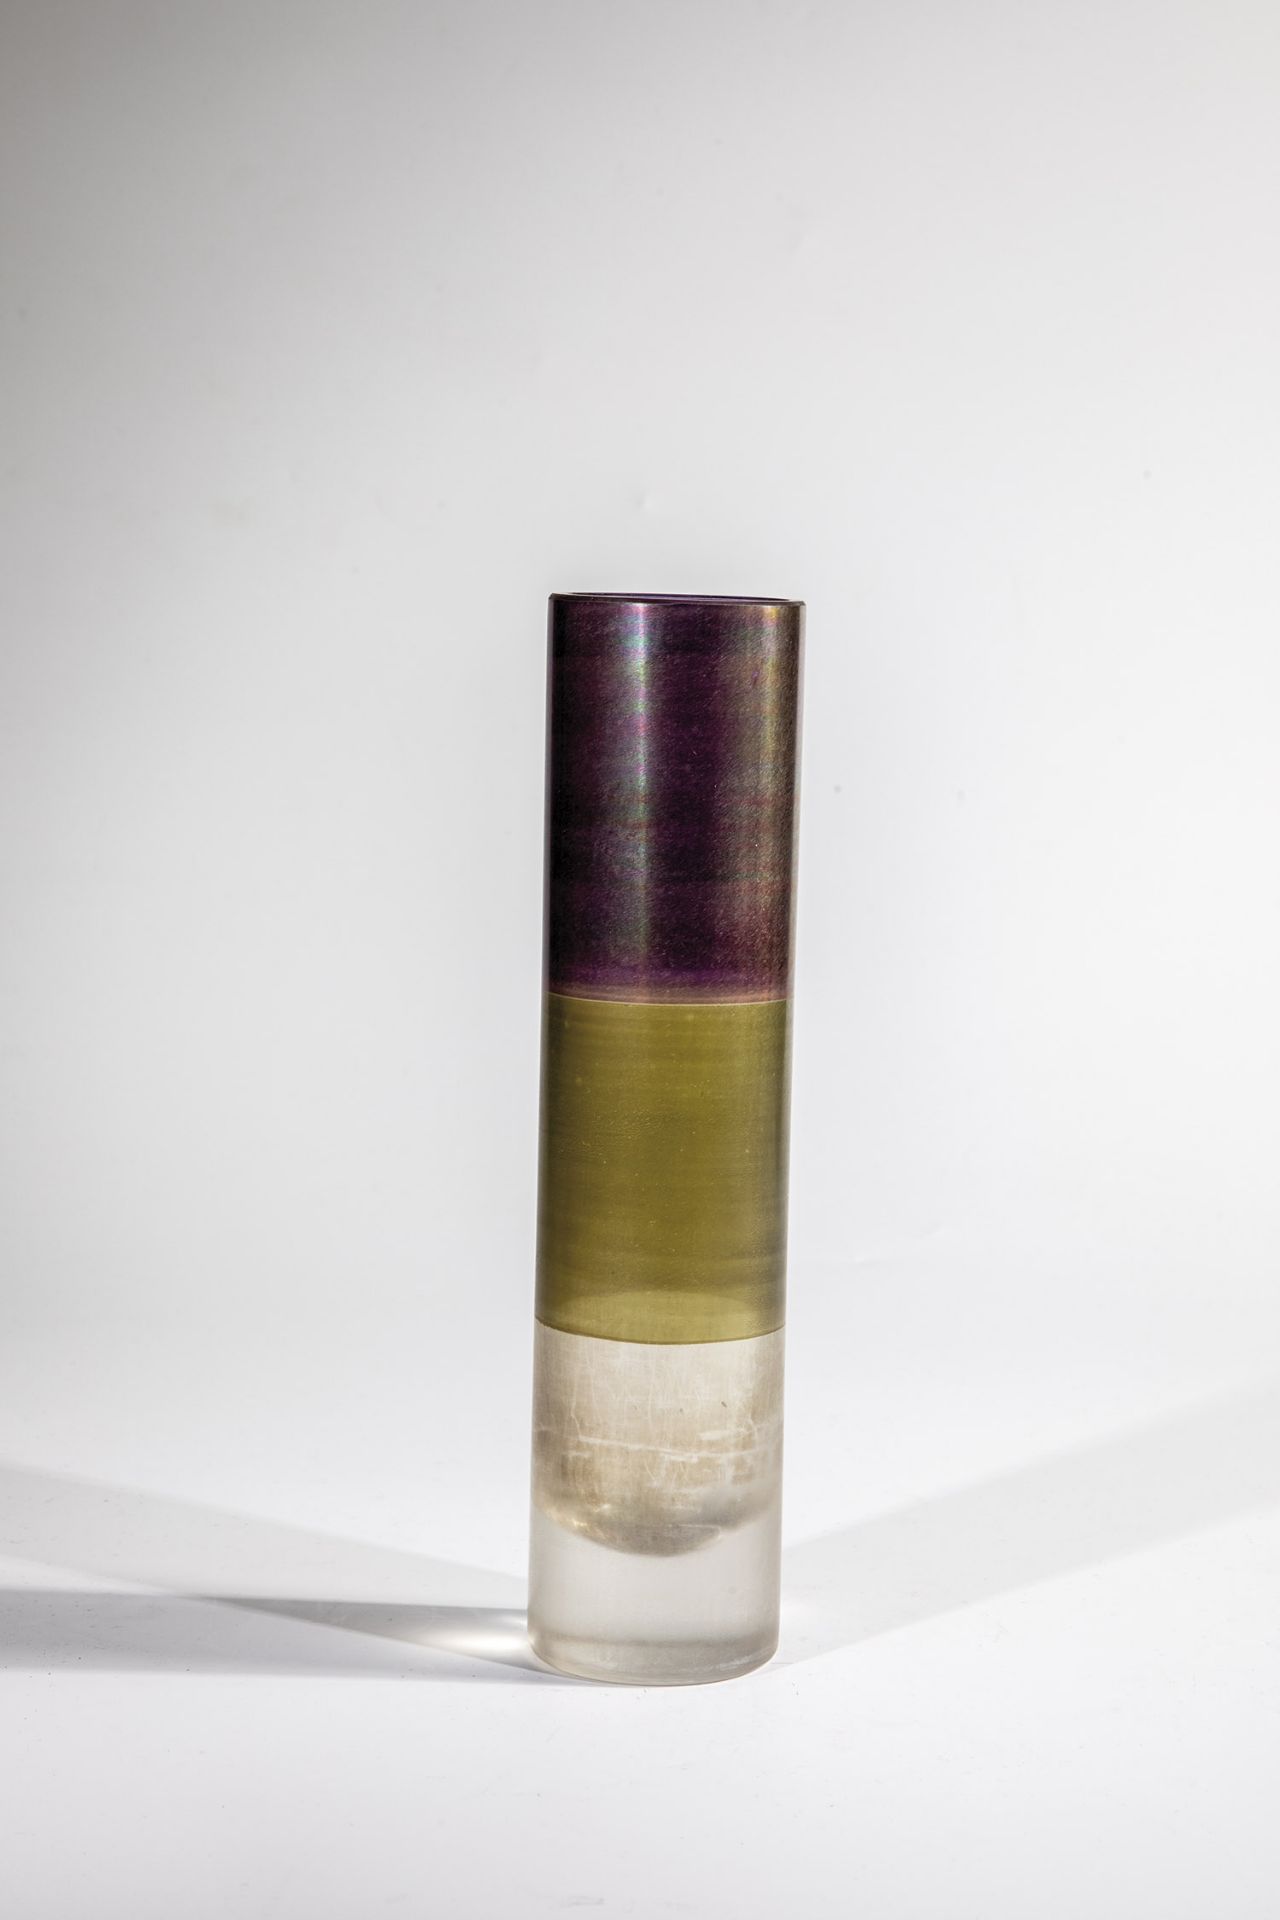 Pole vase Isgard Moje-Wohlgemuth, 1992 Colourless glass, painted with loosened metal joints.